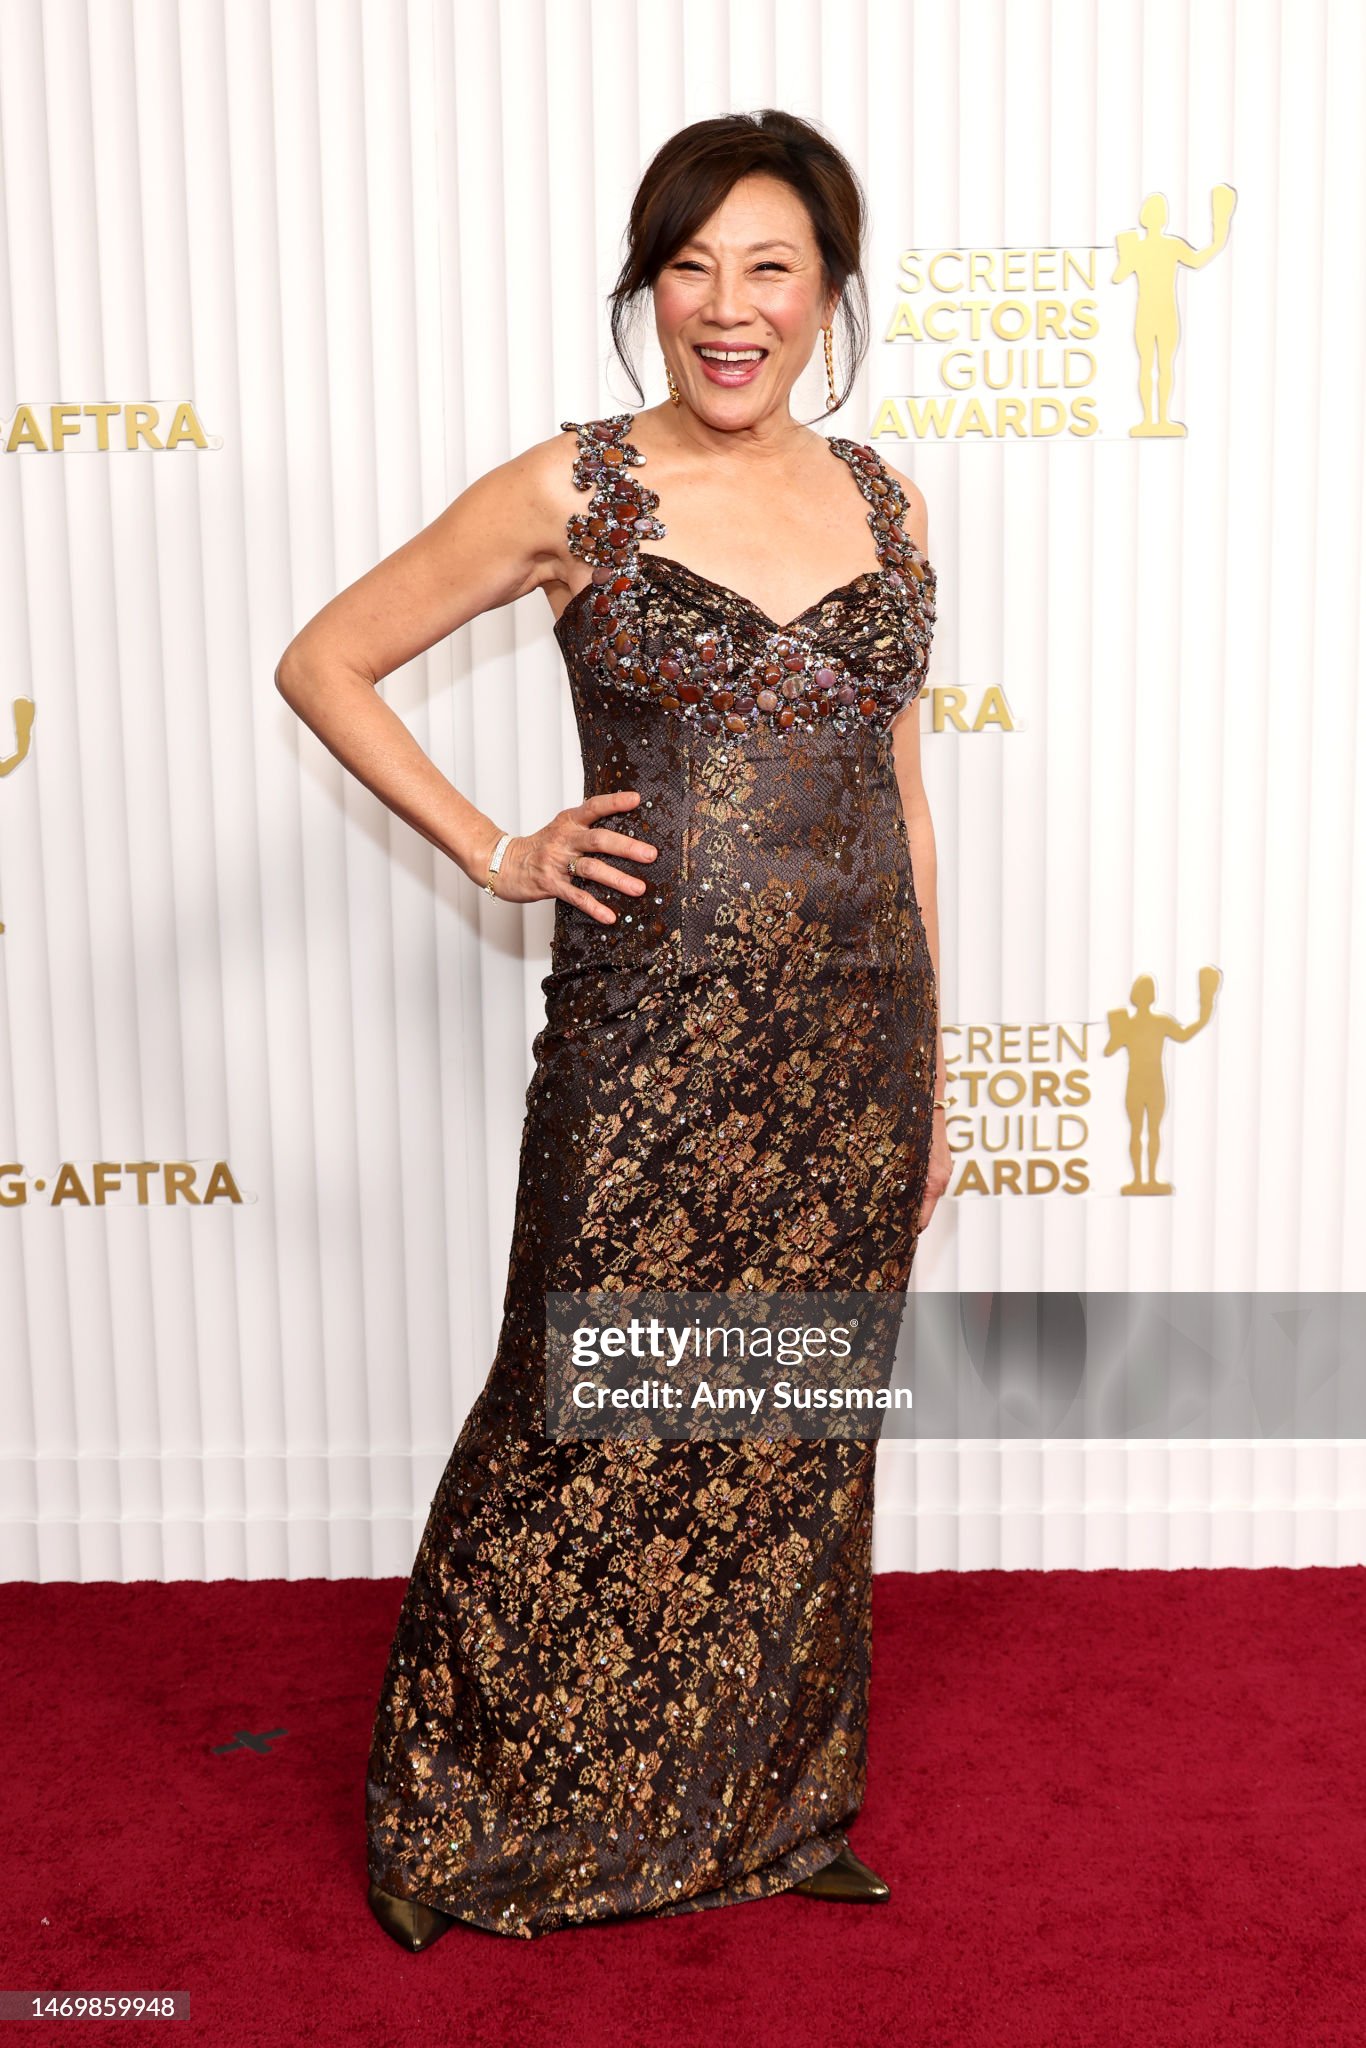 janet-yang-attends-the-29th-annual-screen-actors-guild-awards-at-fairmont-century-plaza-on.jpg